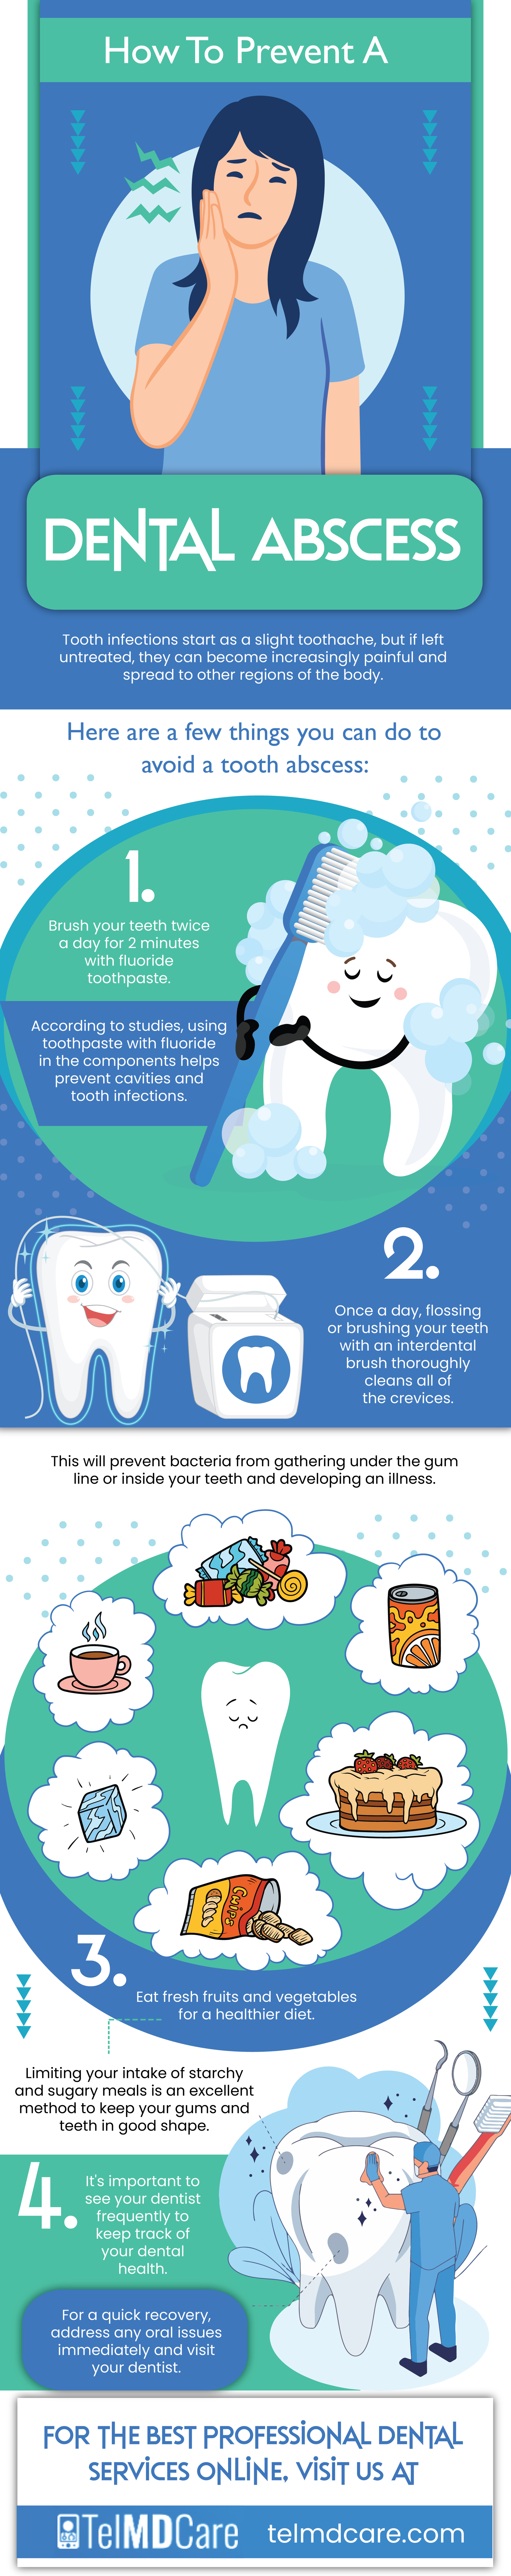 How To Prevent A Dental Abscess